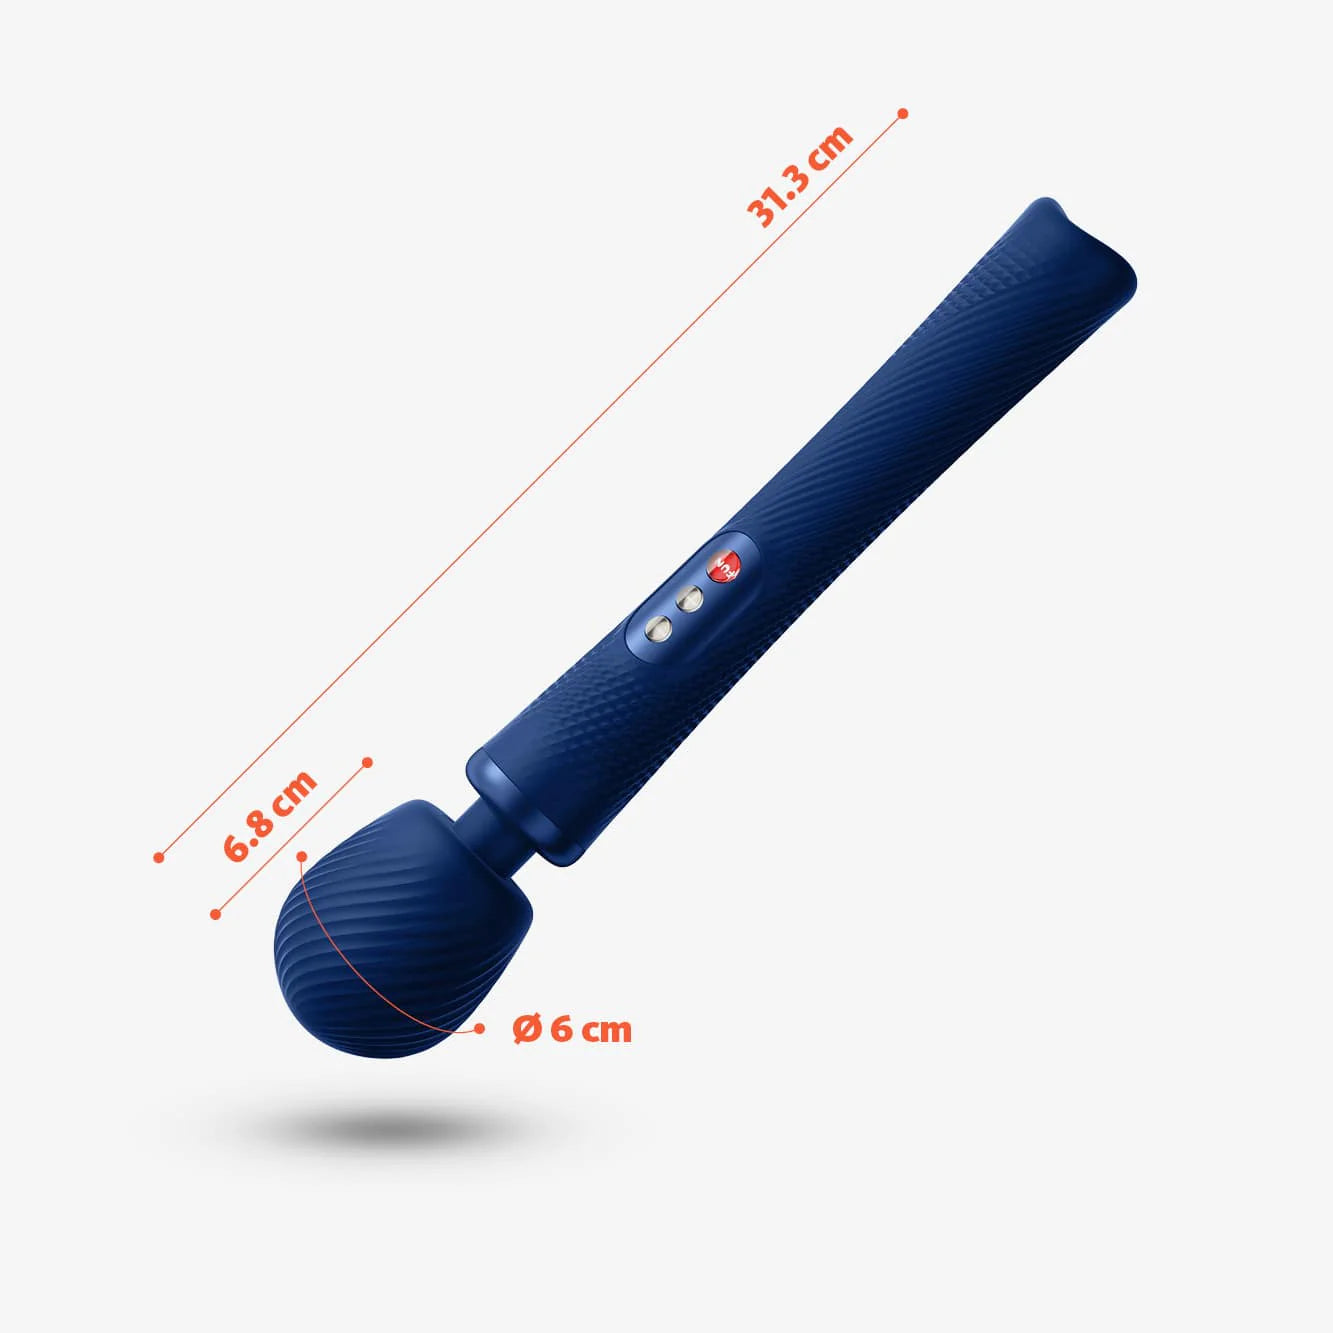 A diagram showing the measurements of the wand. The entire thing is 31.3 centimeters long, the head is 6.8 centimeters long, and the circumference of the head is 6 centimeters.